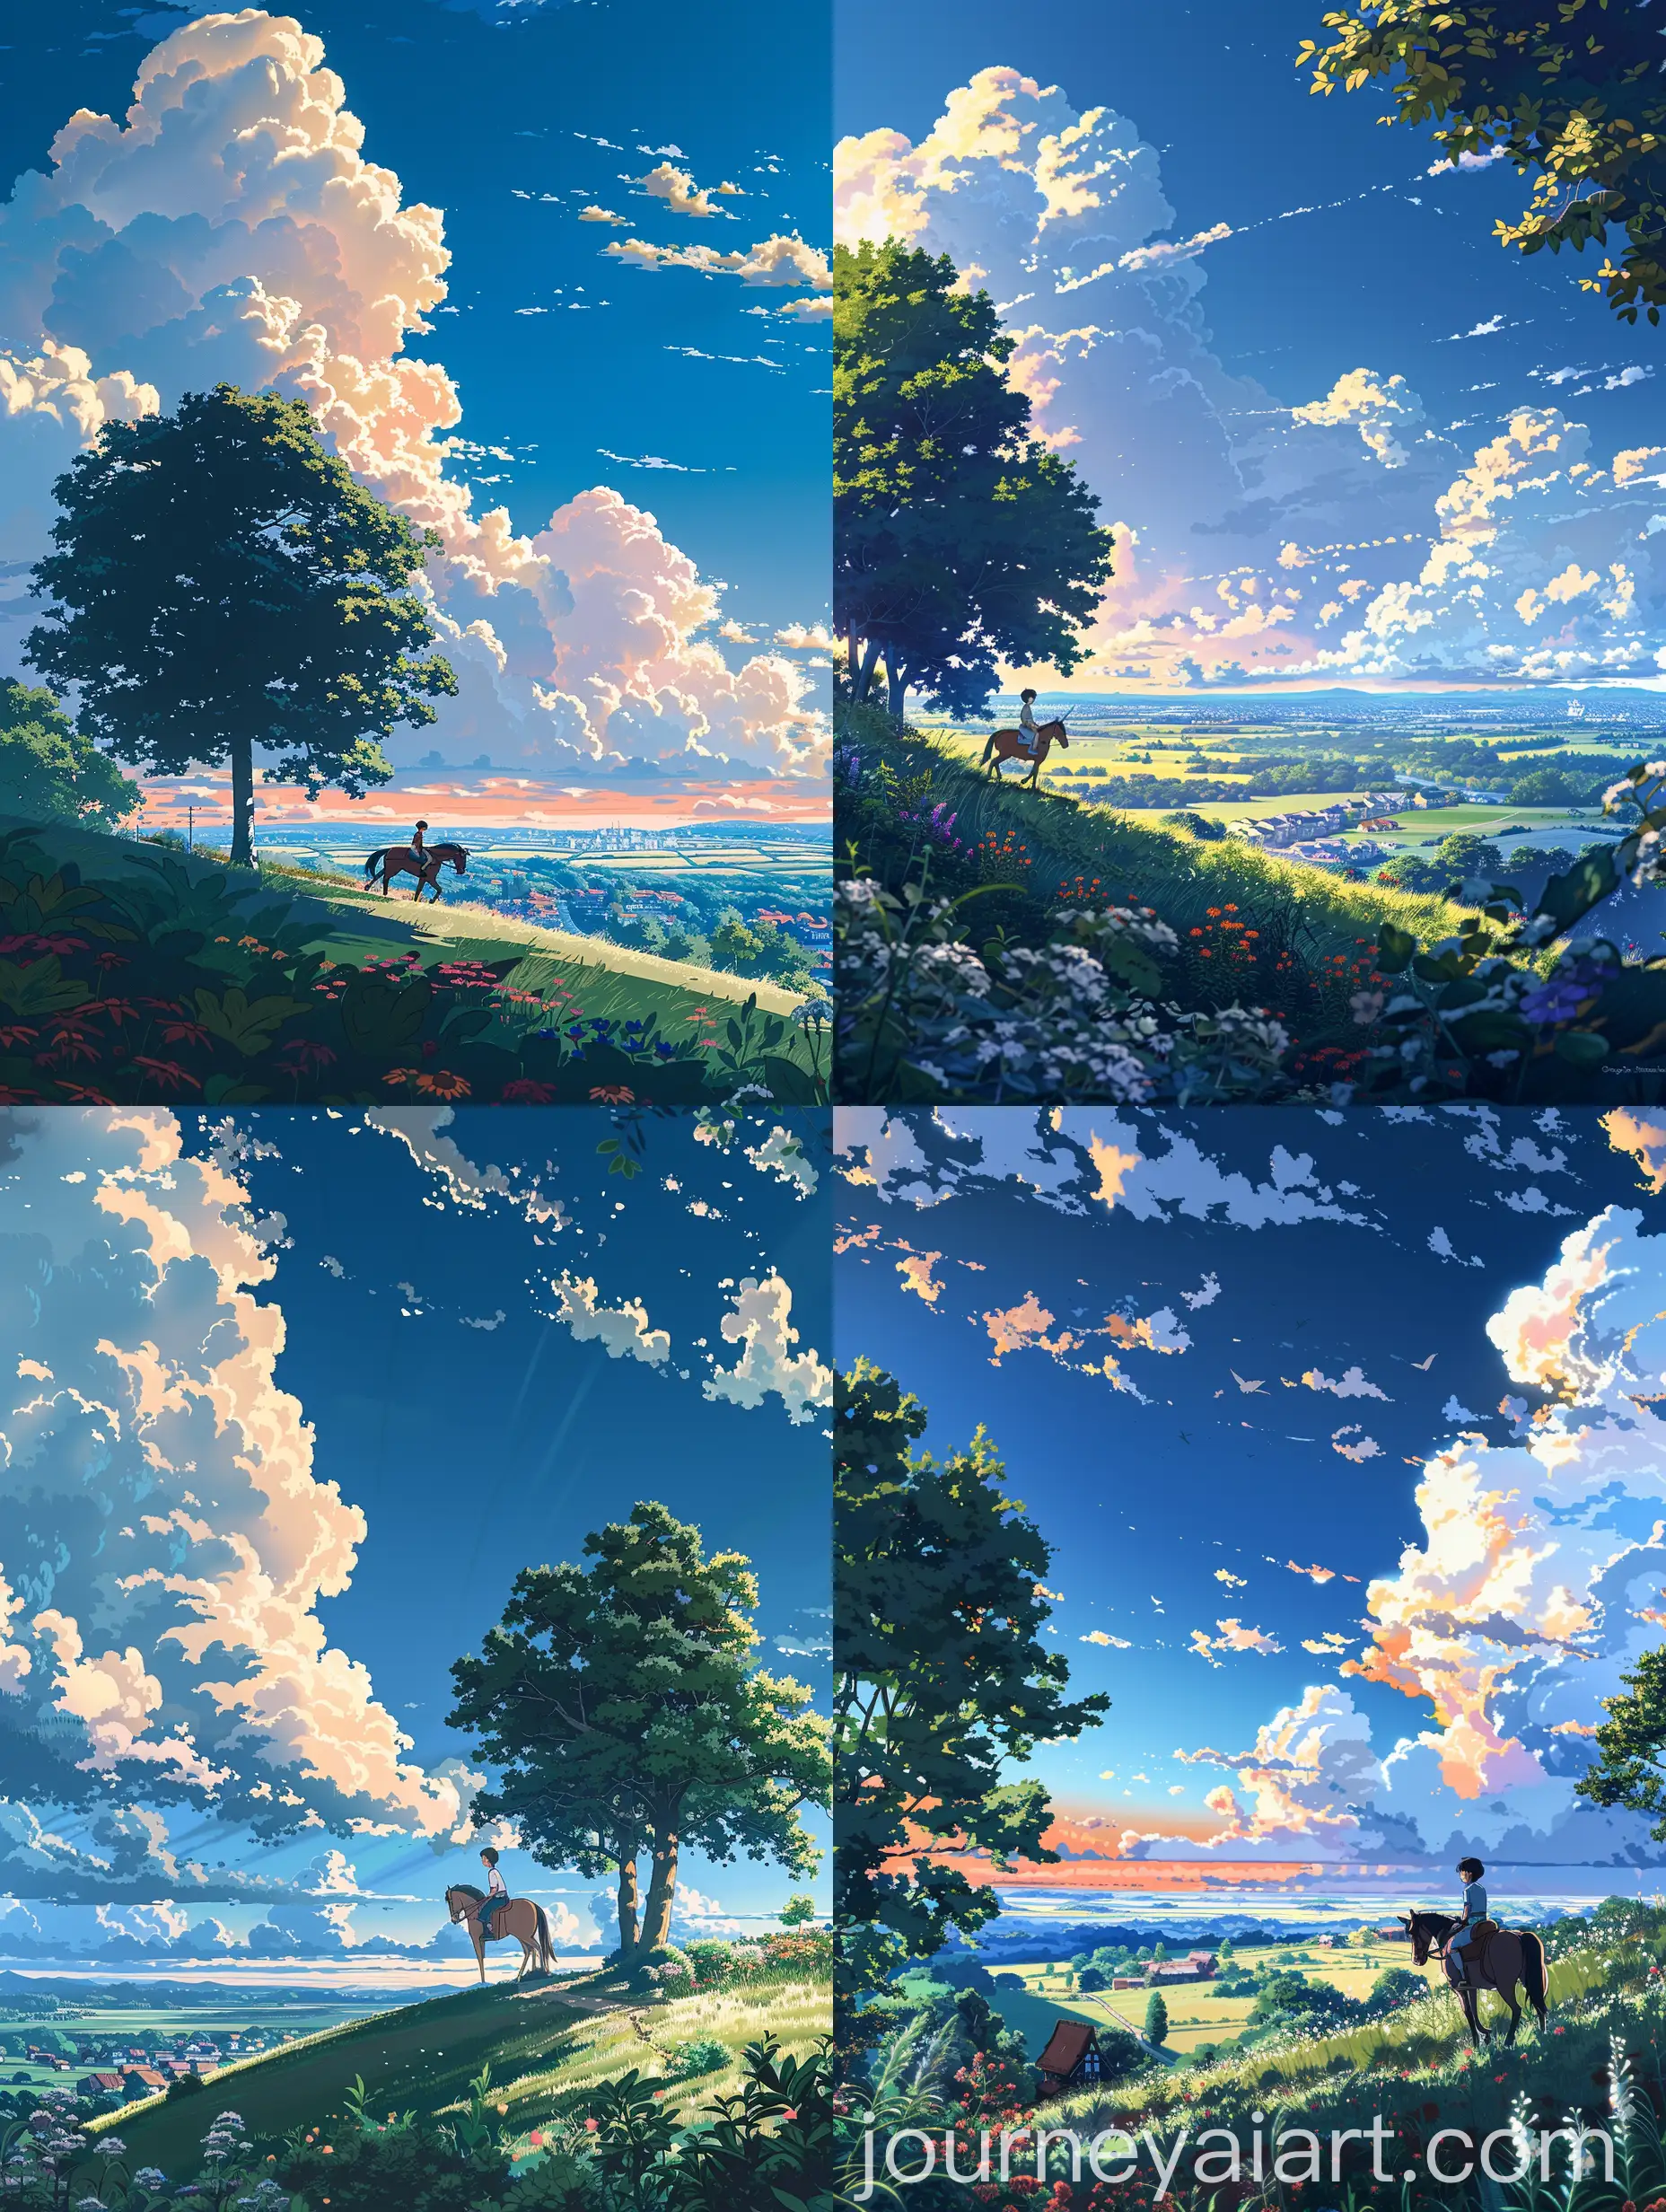 Anime-Landscape-with-Boy-Riding-Horse-in-Cinematic-Studio-Ghibli-Style